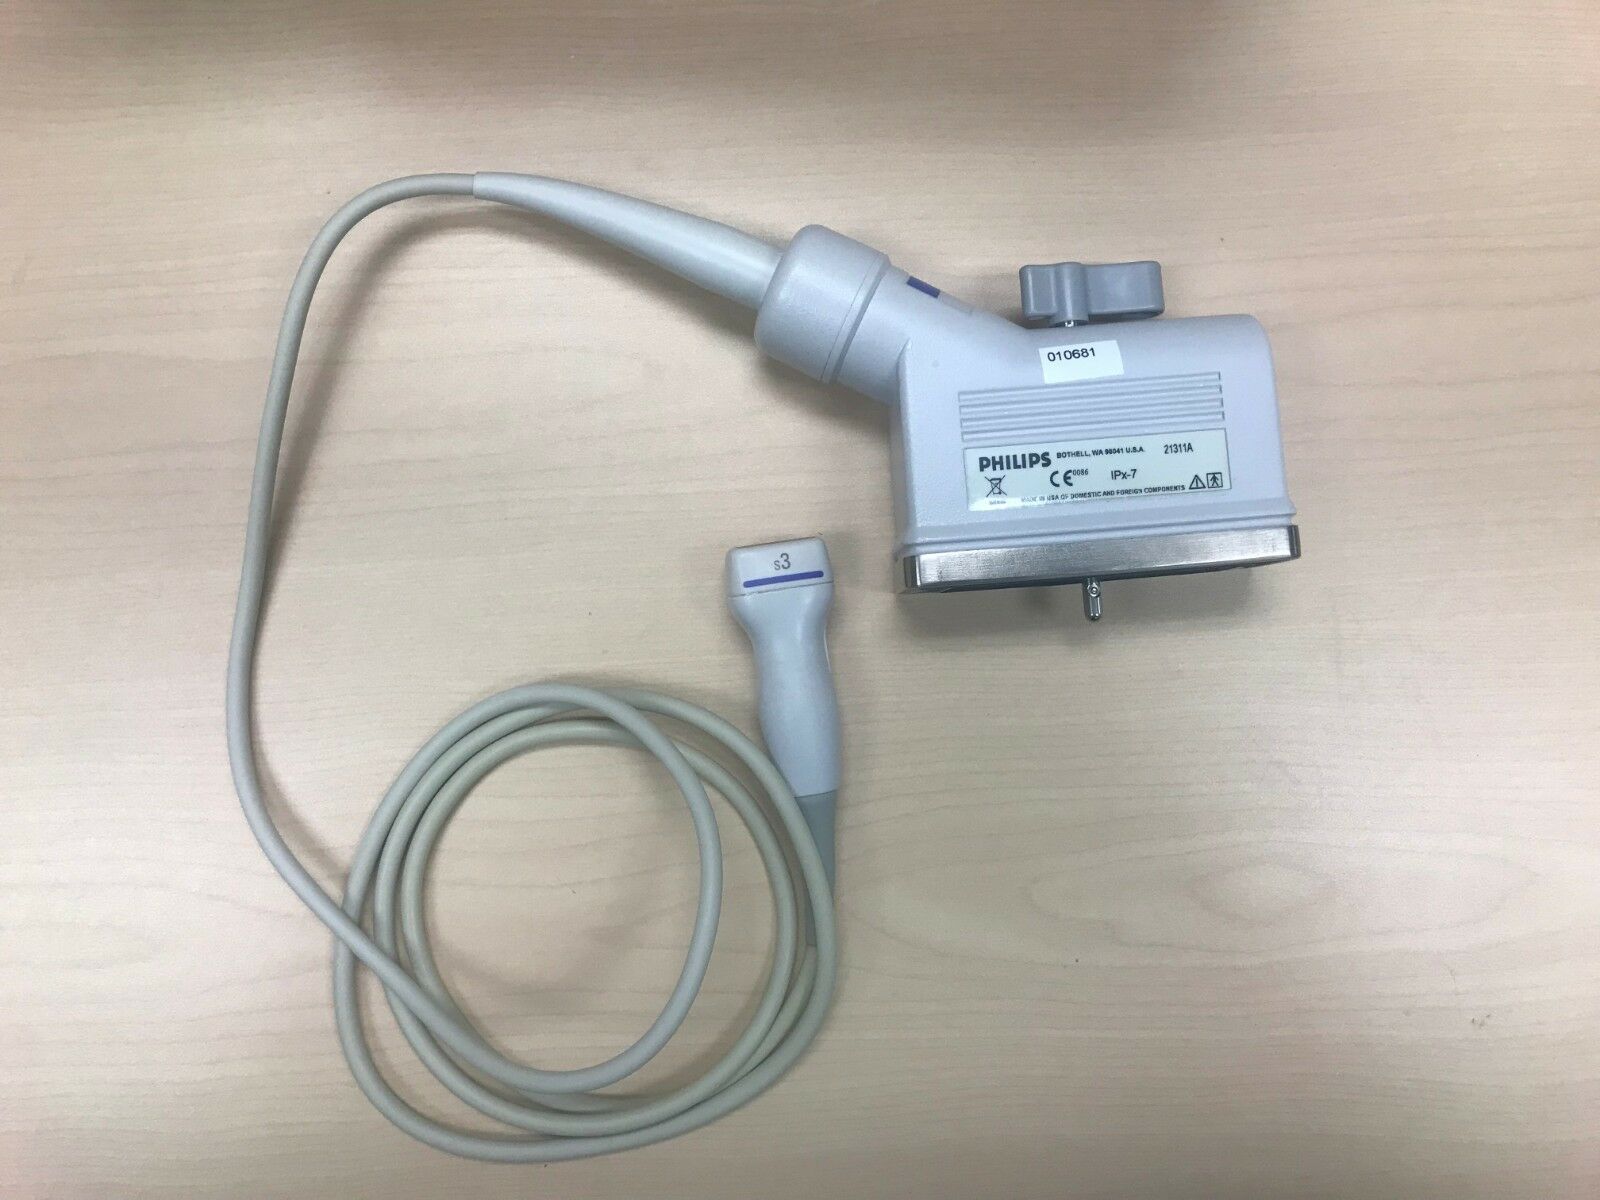 PHILIPS  S3 ULTRASOUND PROBE 21311A    (5111) DIAGNOSTIC ULTRASOUND MACHINES FOR SALE